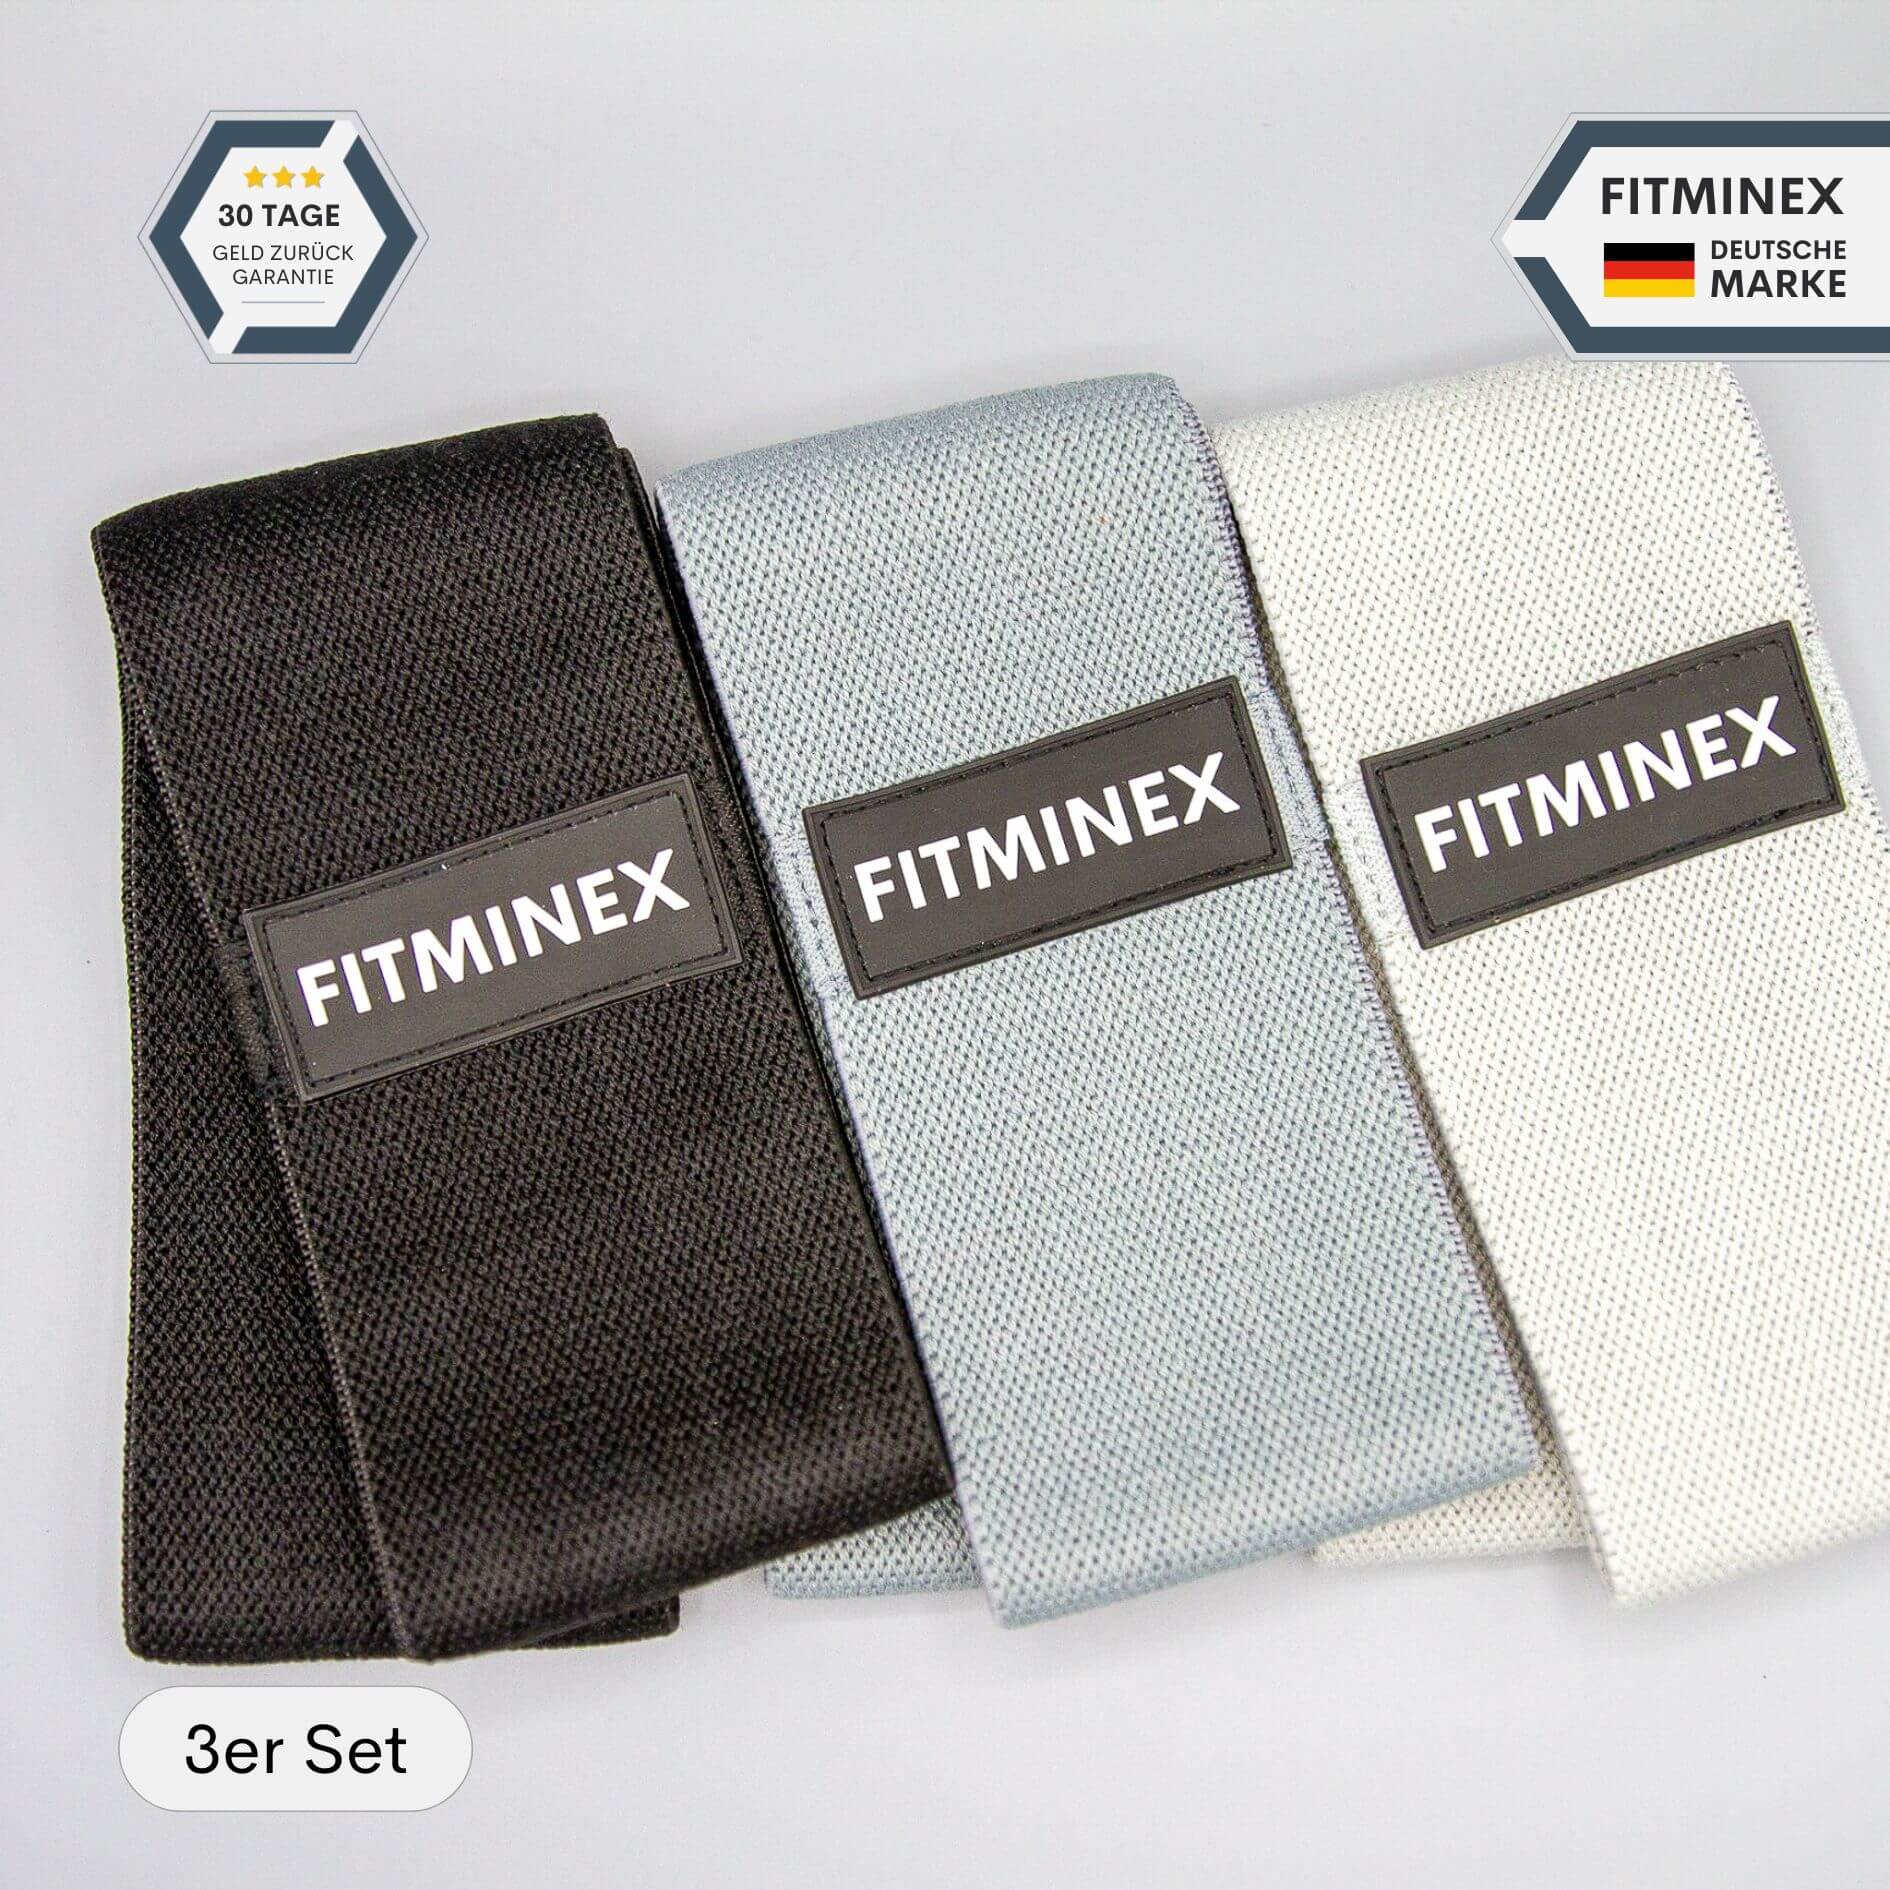 FITMINEX Fitnessband Booty Band